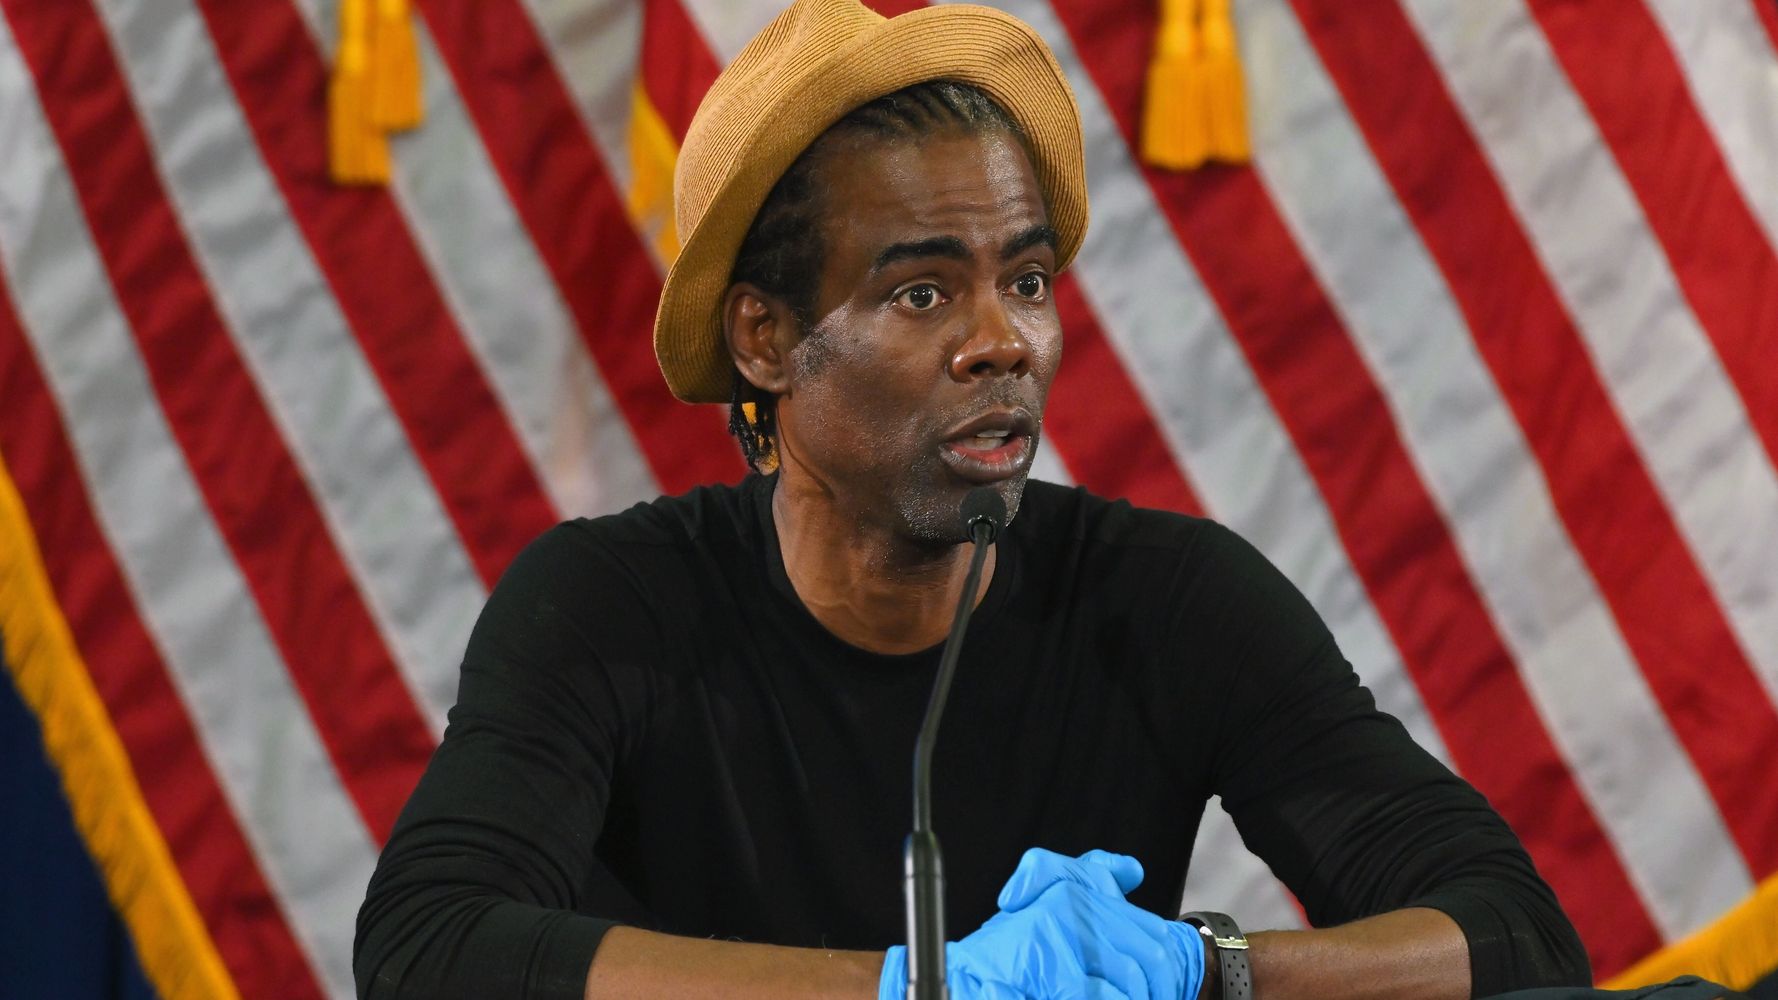 Chris Rock Urges People To Get Vaccinated After Getting COVID-19